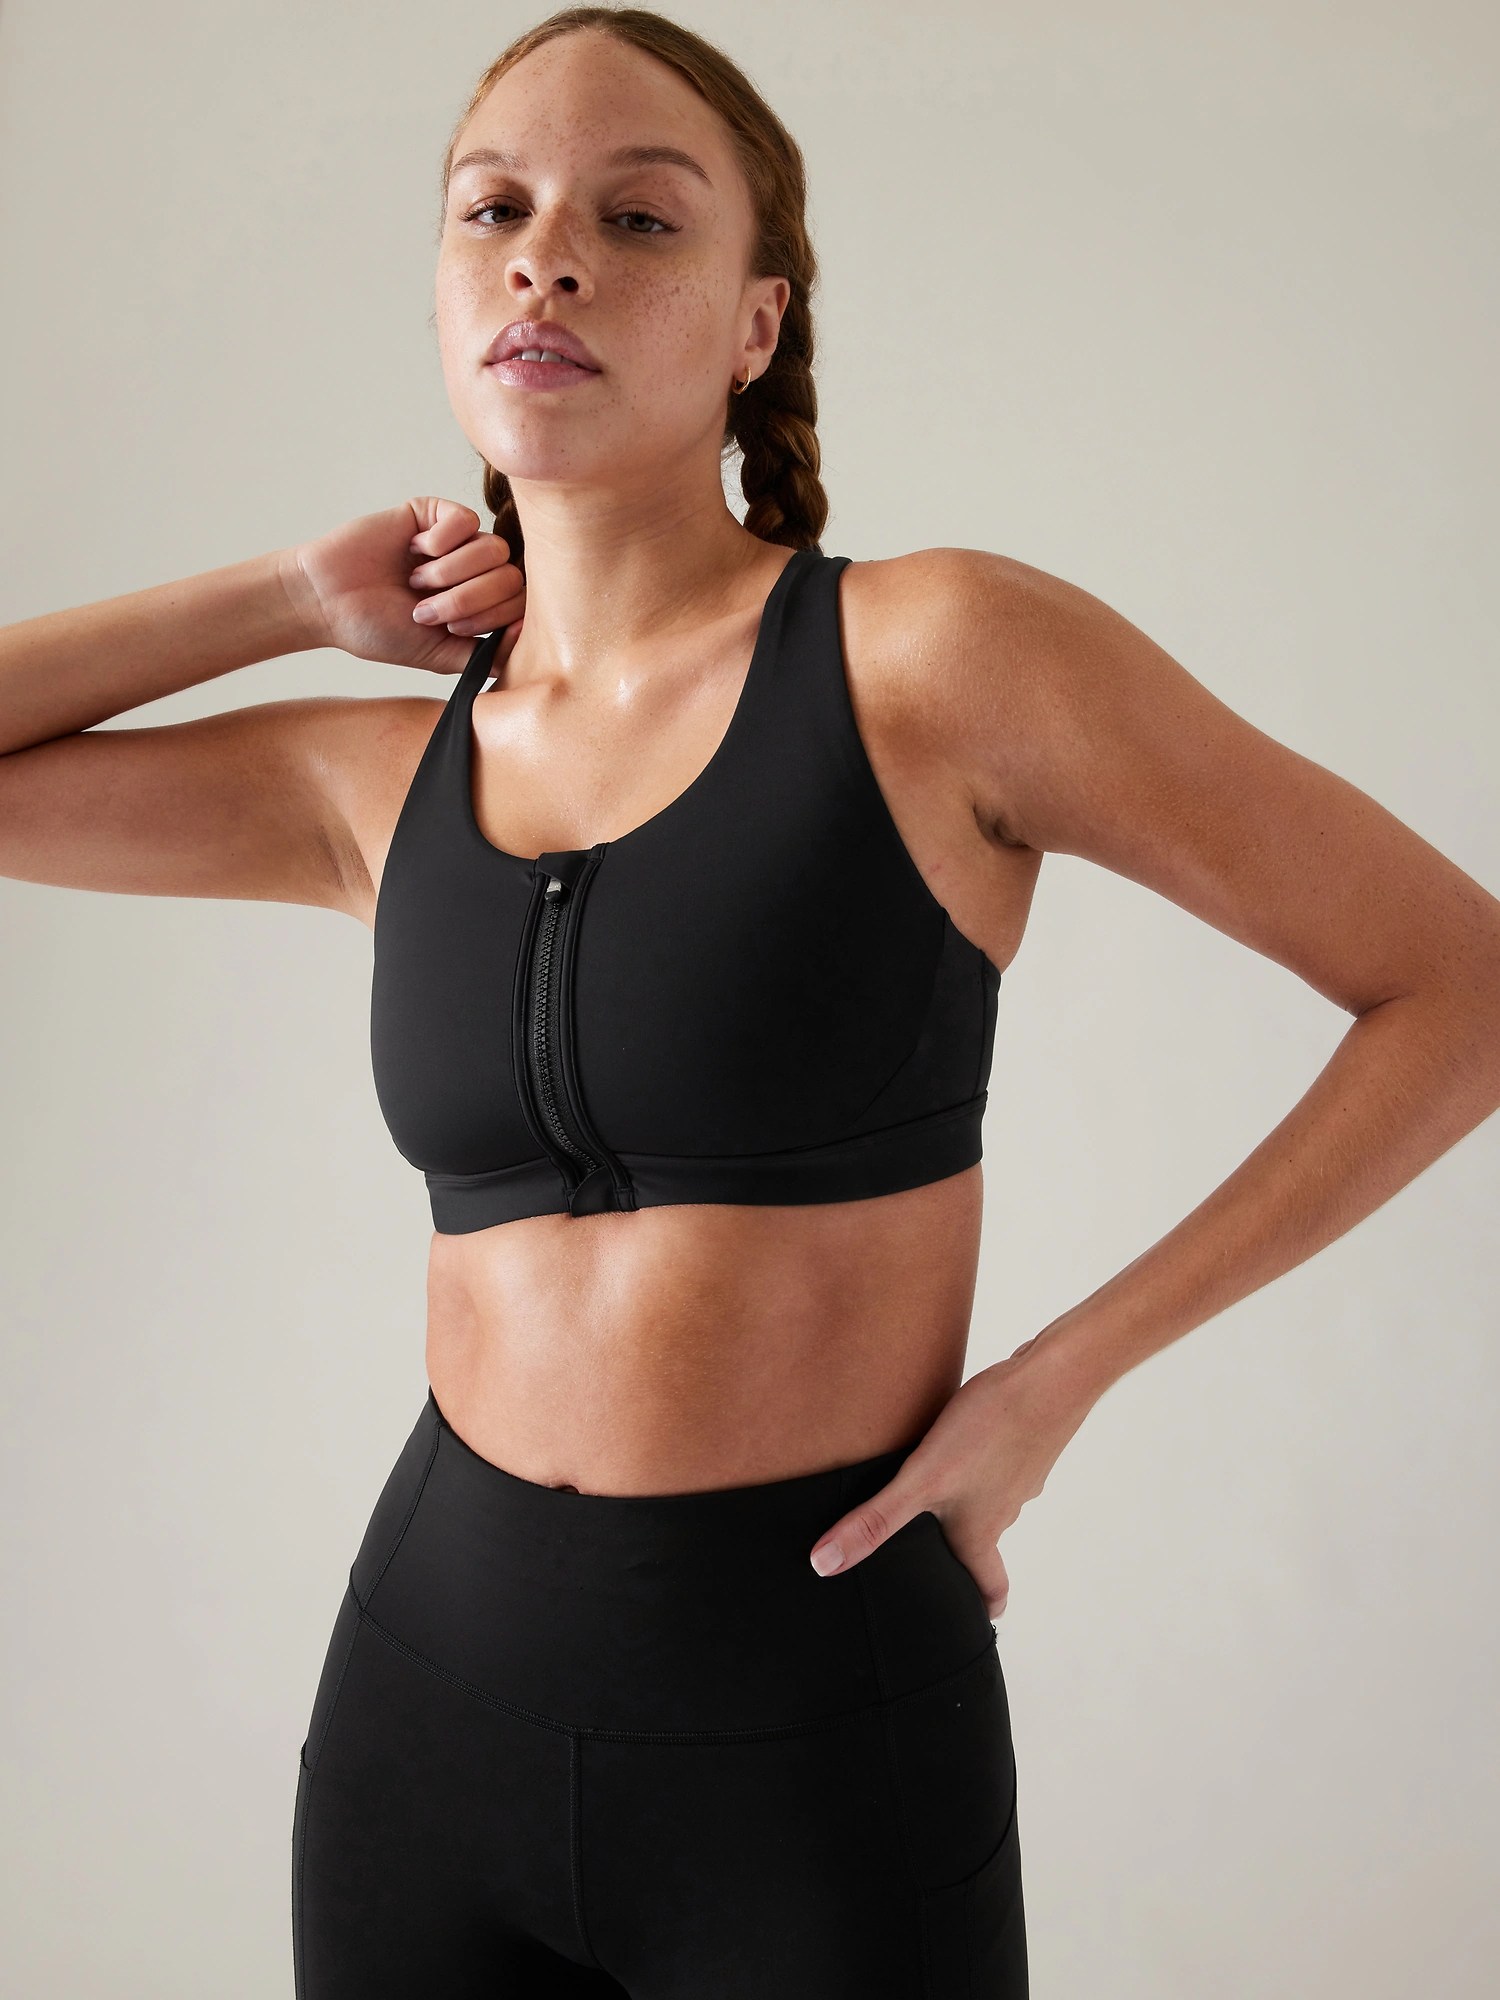 The 8 Best Post-Mastectomy Bras for Breast Cancer Survivors - A